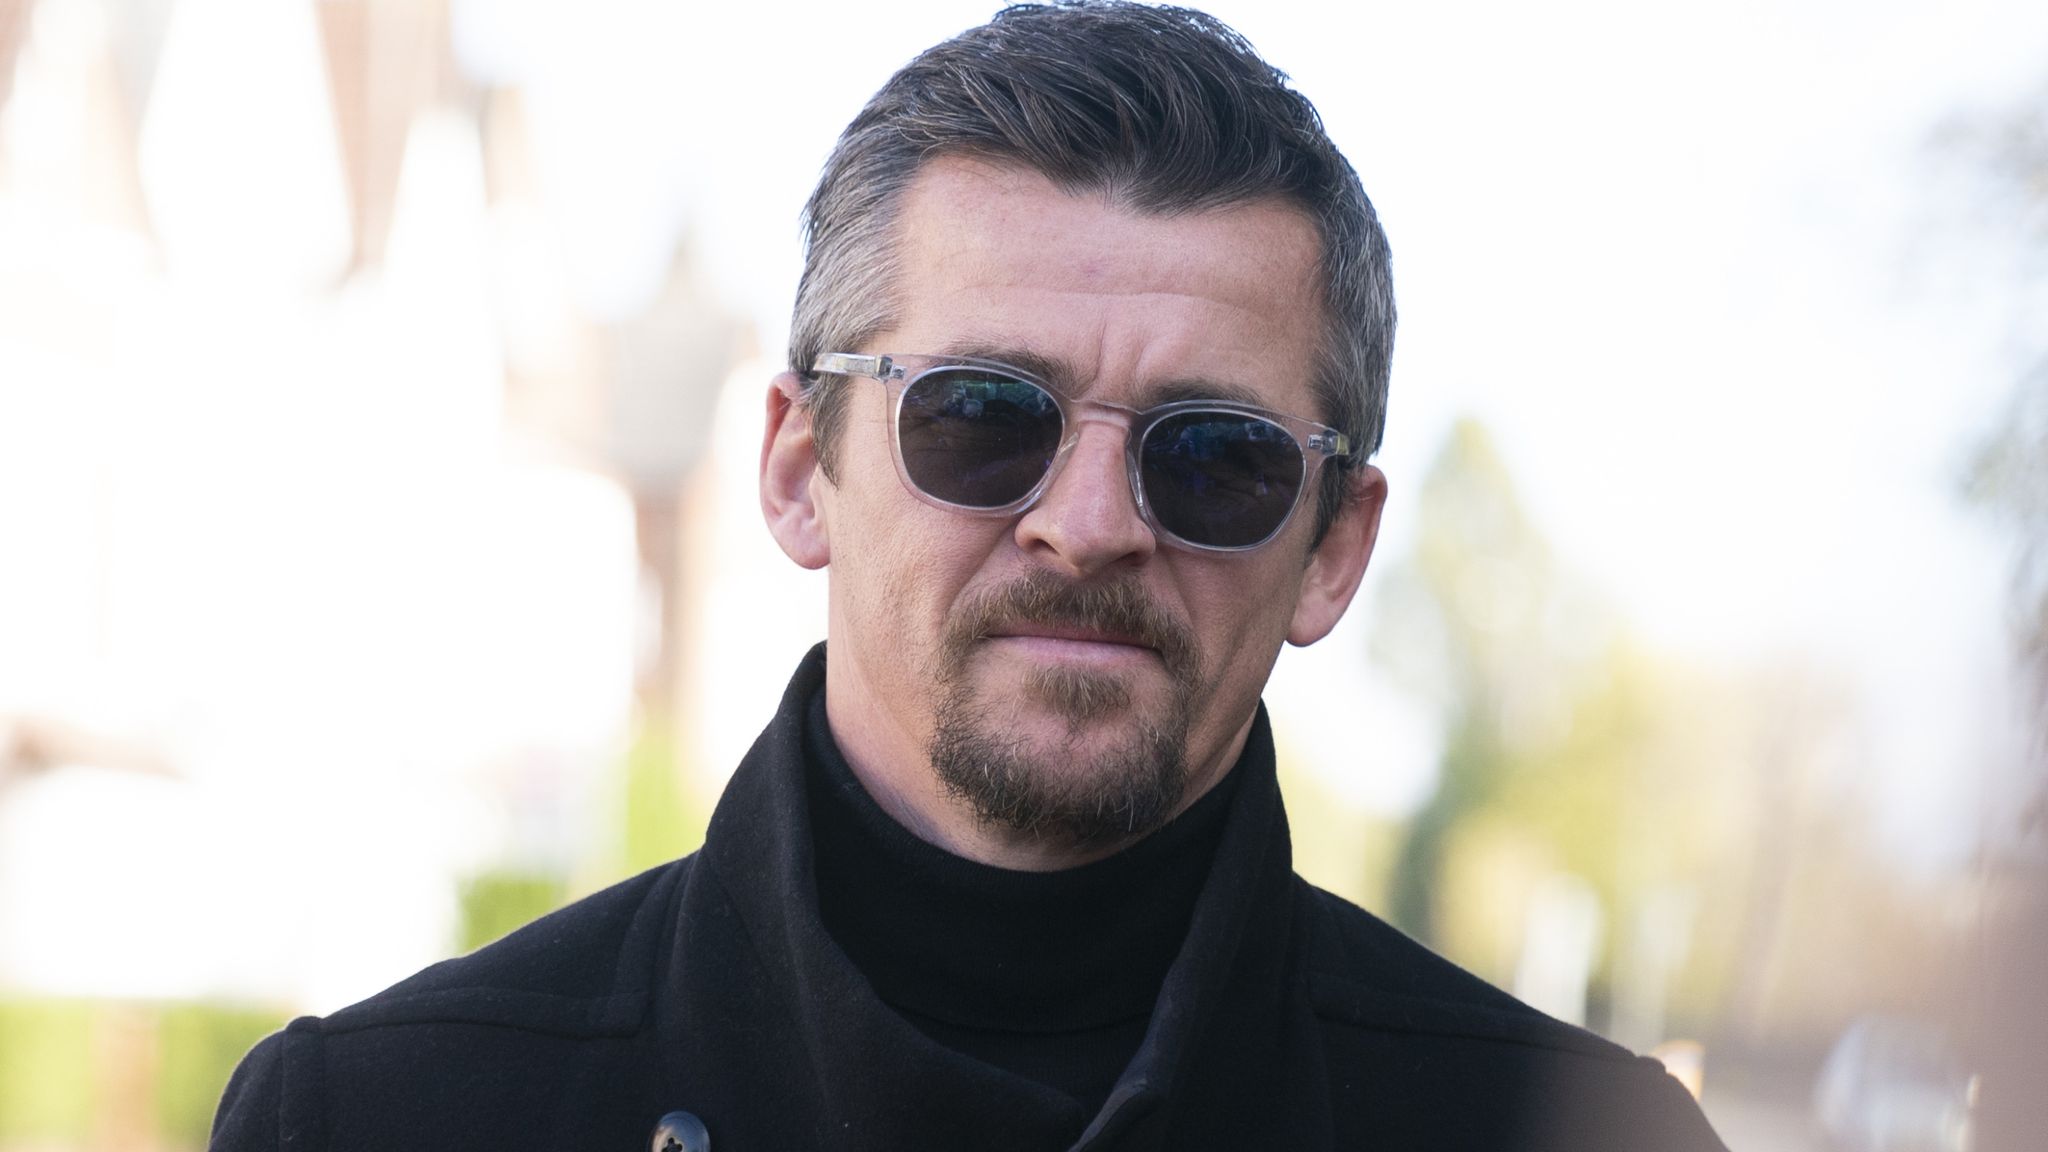 Joey Barton Case Of Assault By Beating Against Bristol Rovers Manager Dismissed Due To Lack